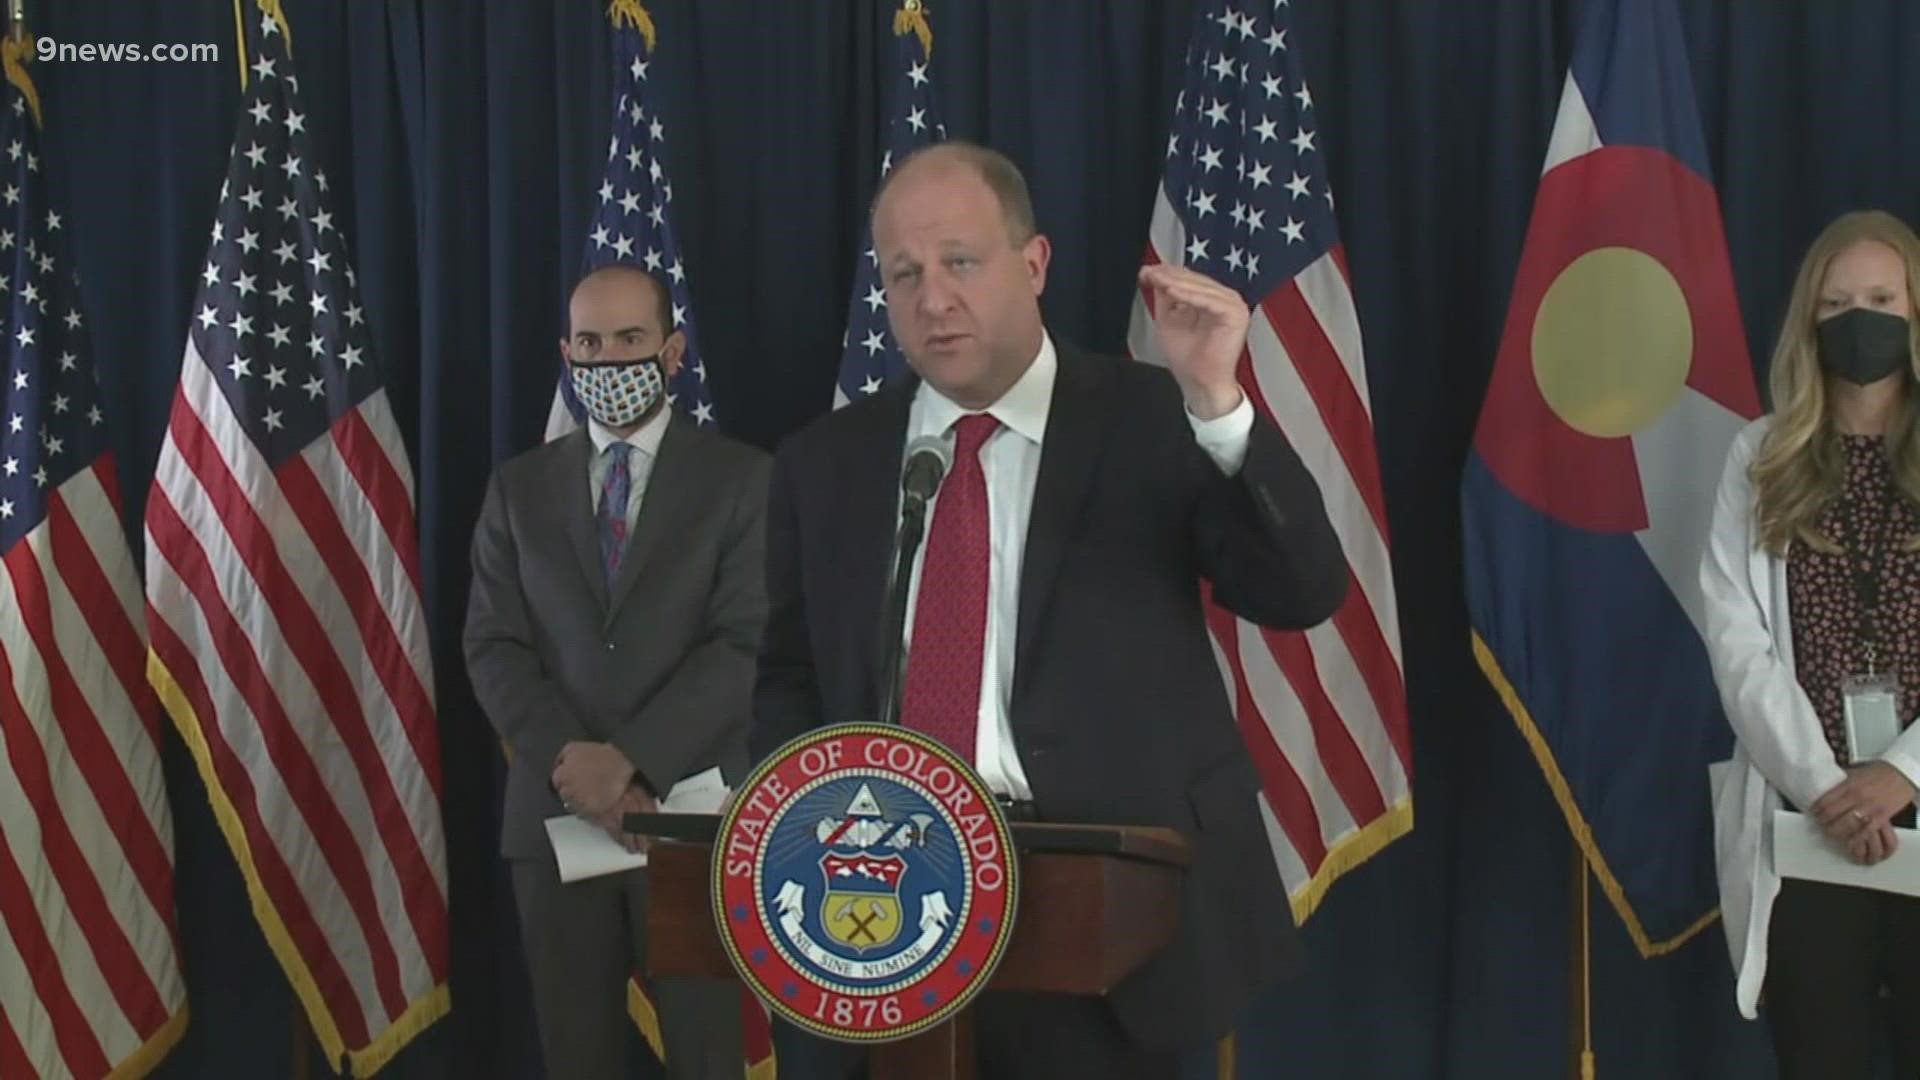 Gov. Jared Polis gave an update on Colorado's recovery efforts in response to the COVID-19 pandemic on Friday, Sept. 10, 2021.